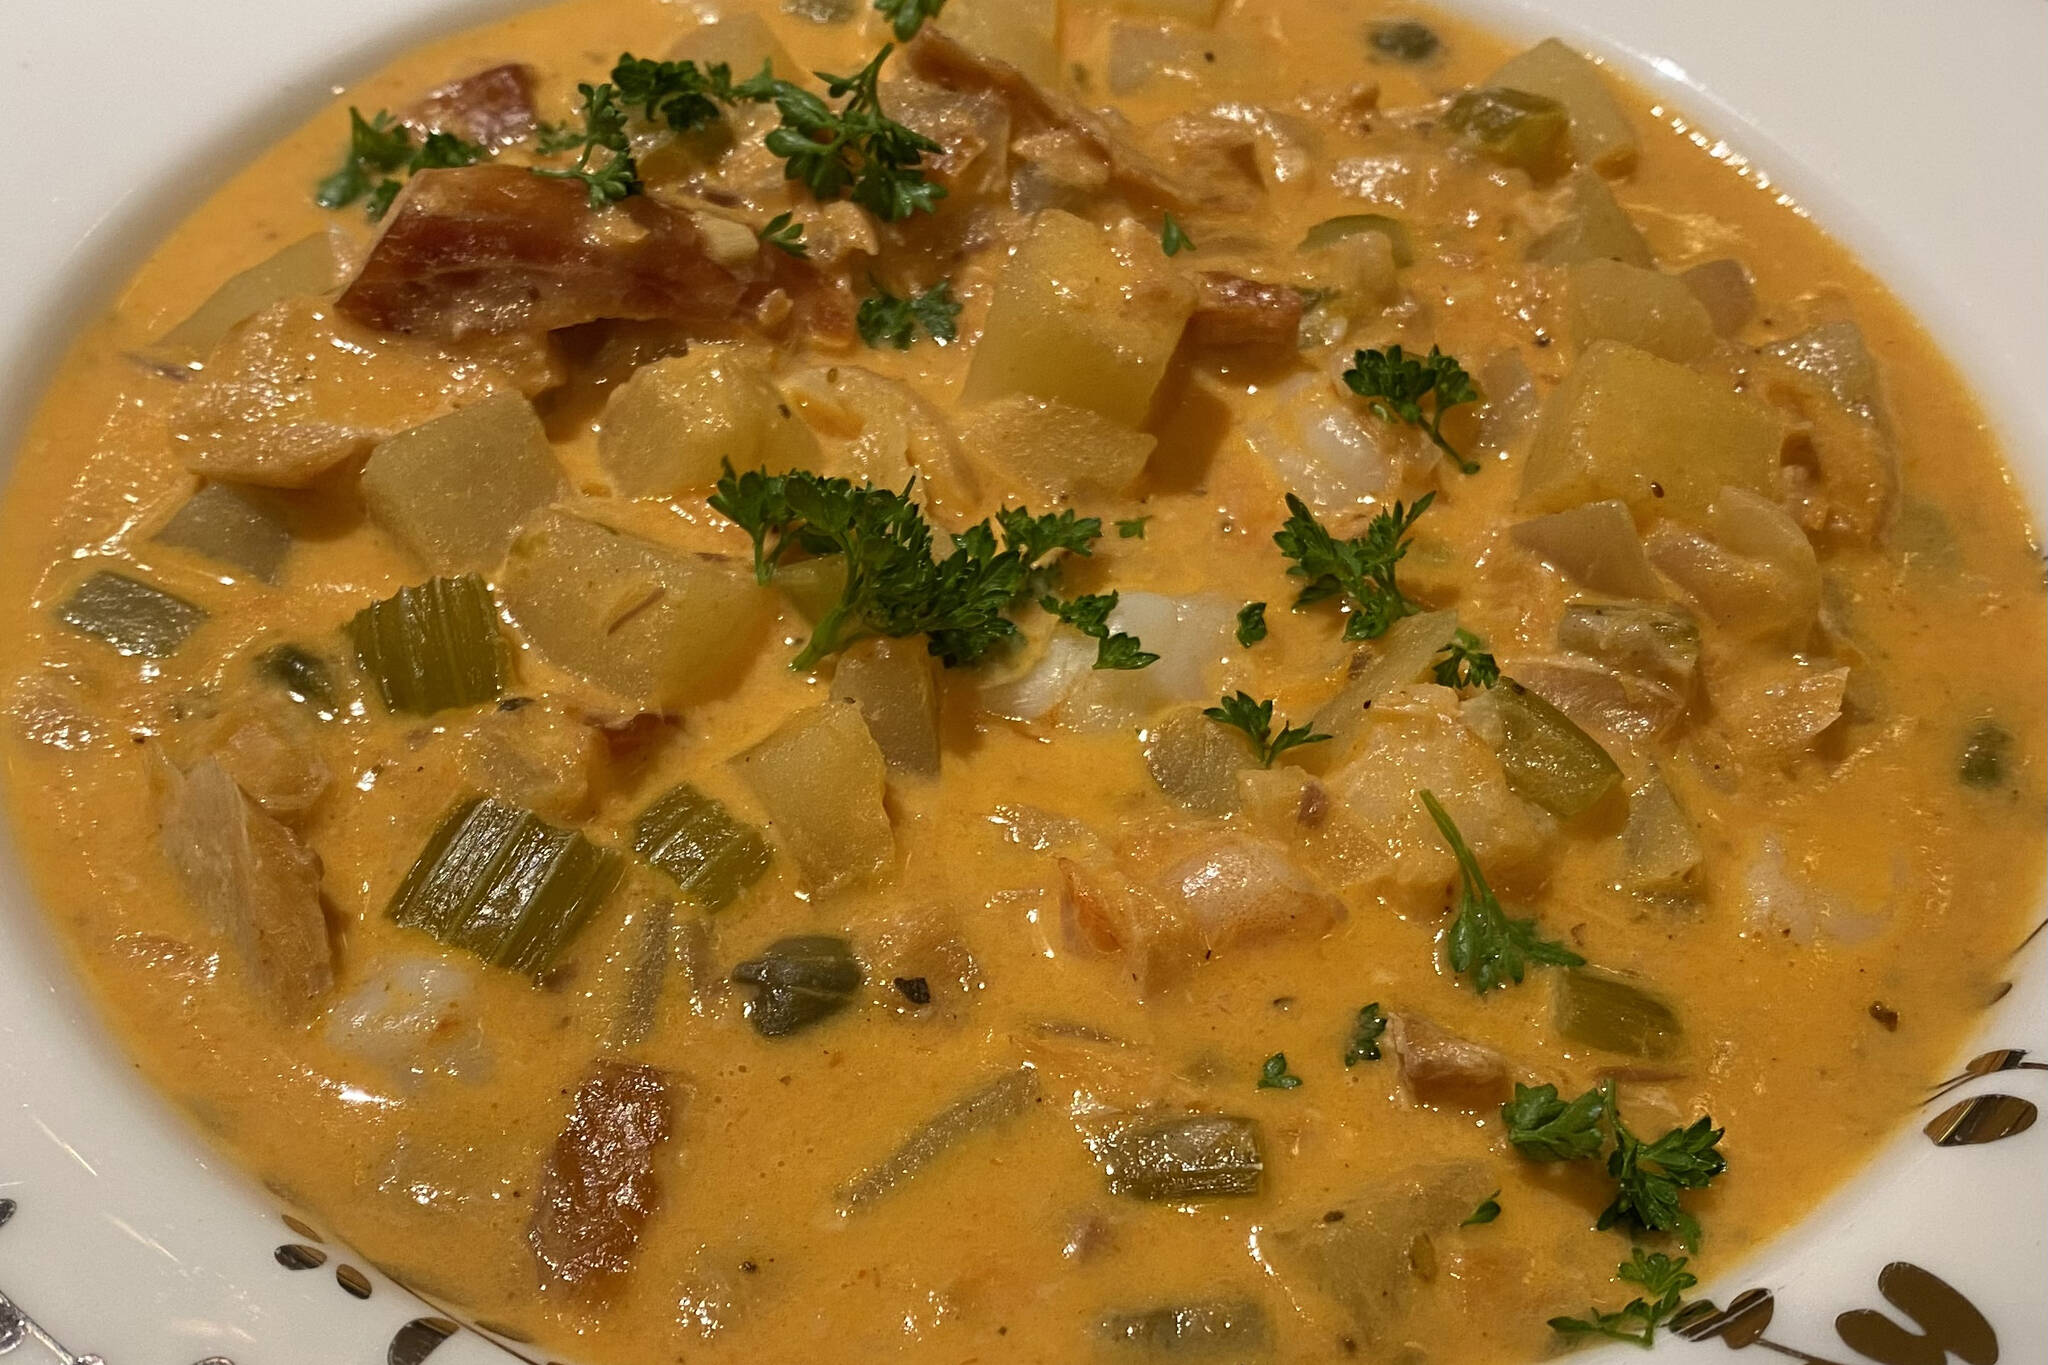 This hearty salmon chowder takes a shot at recreating the famous smoked salmon chowder served at Pike Place Chowder in Seattle. (Photo by Tressa Dale/Peninsula Clarion)